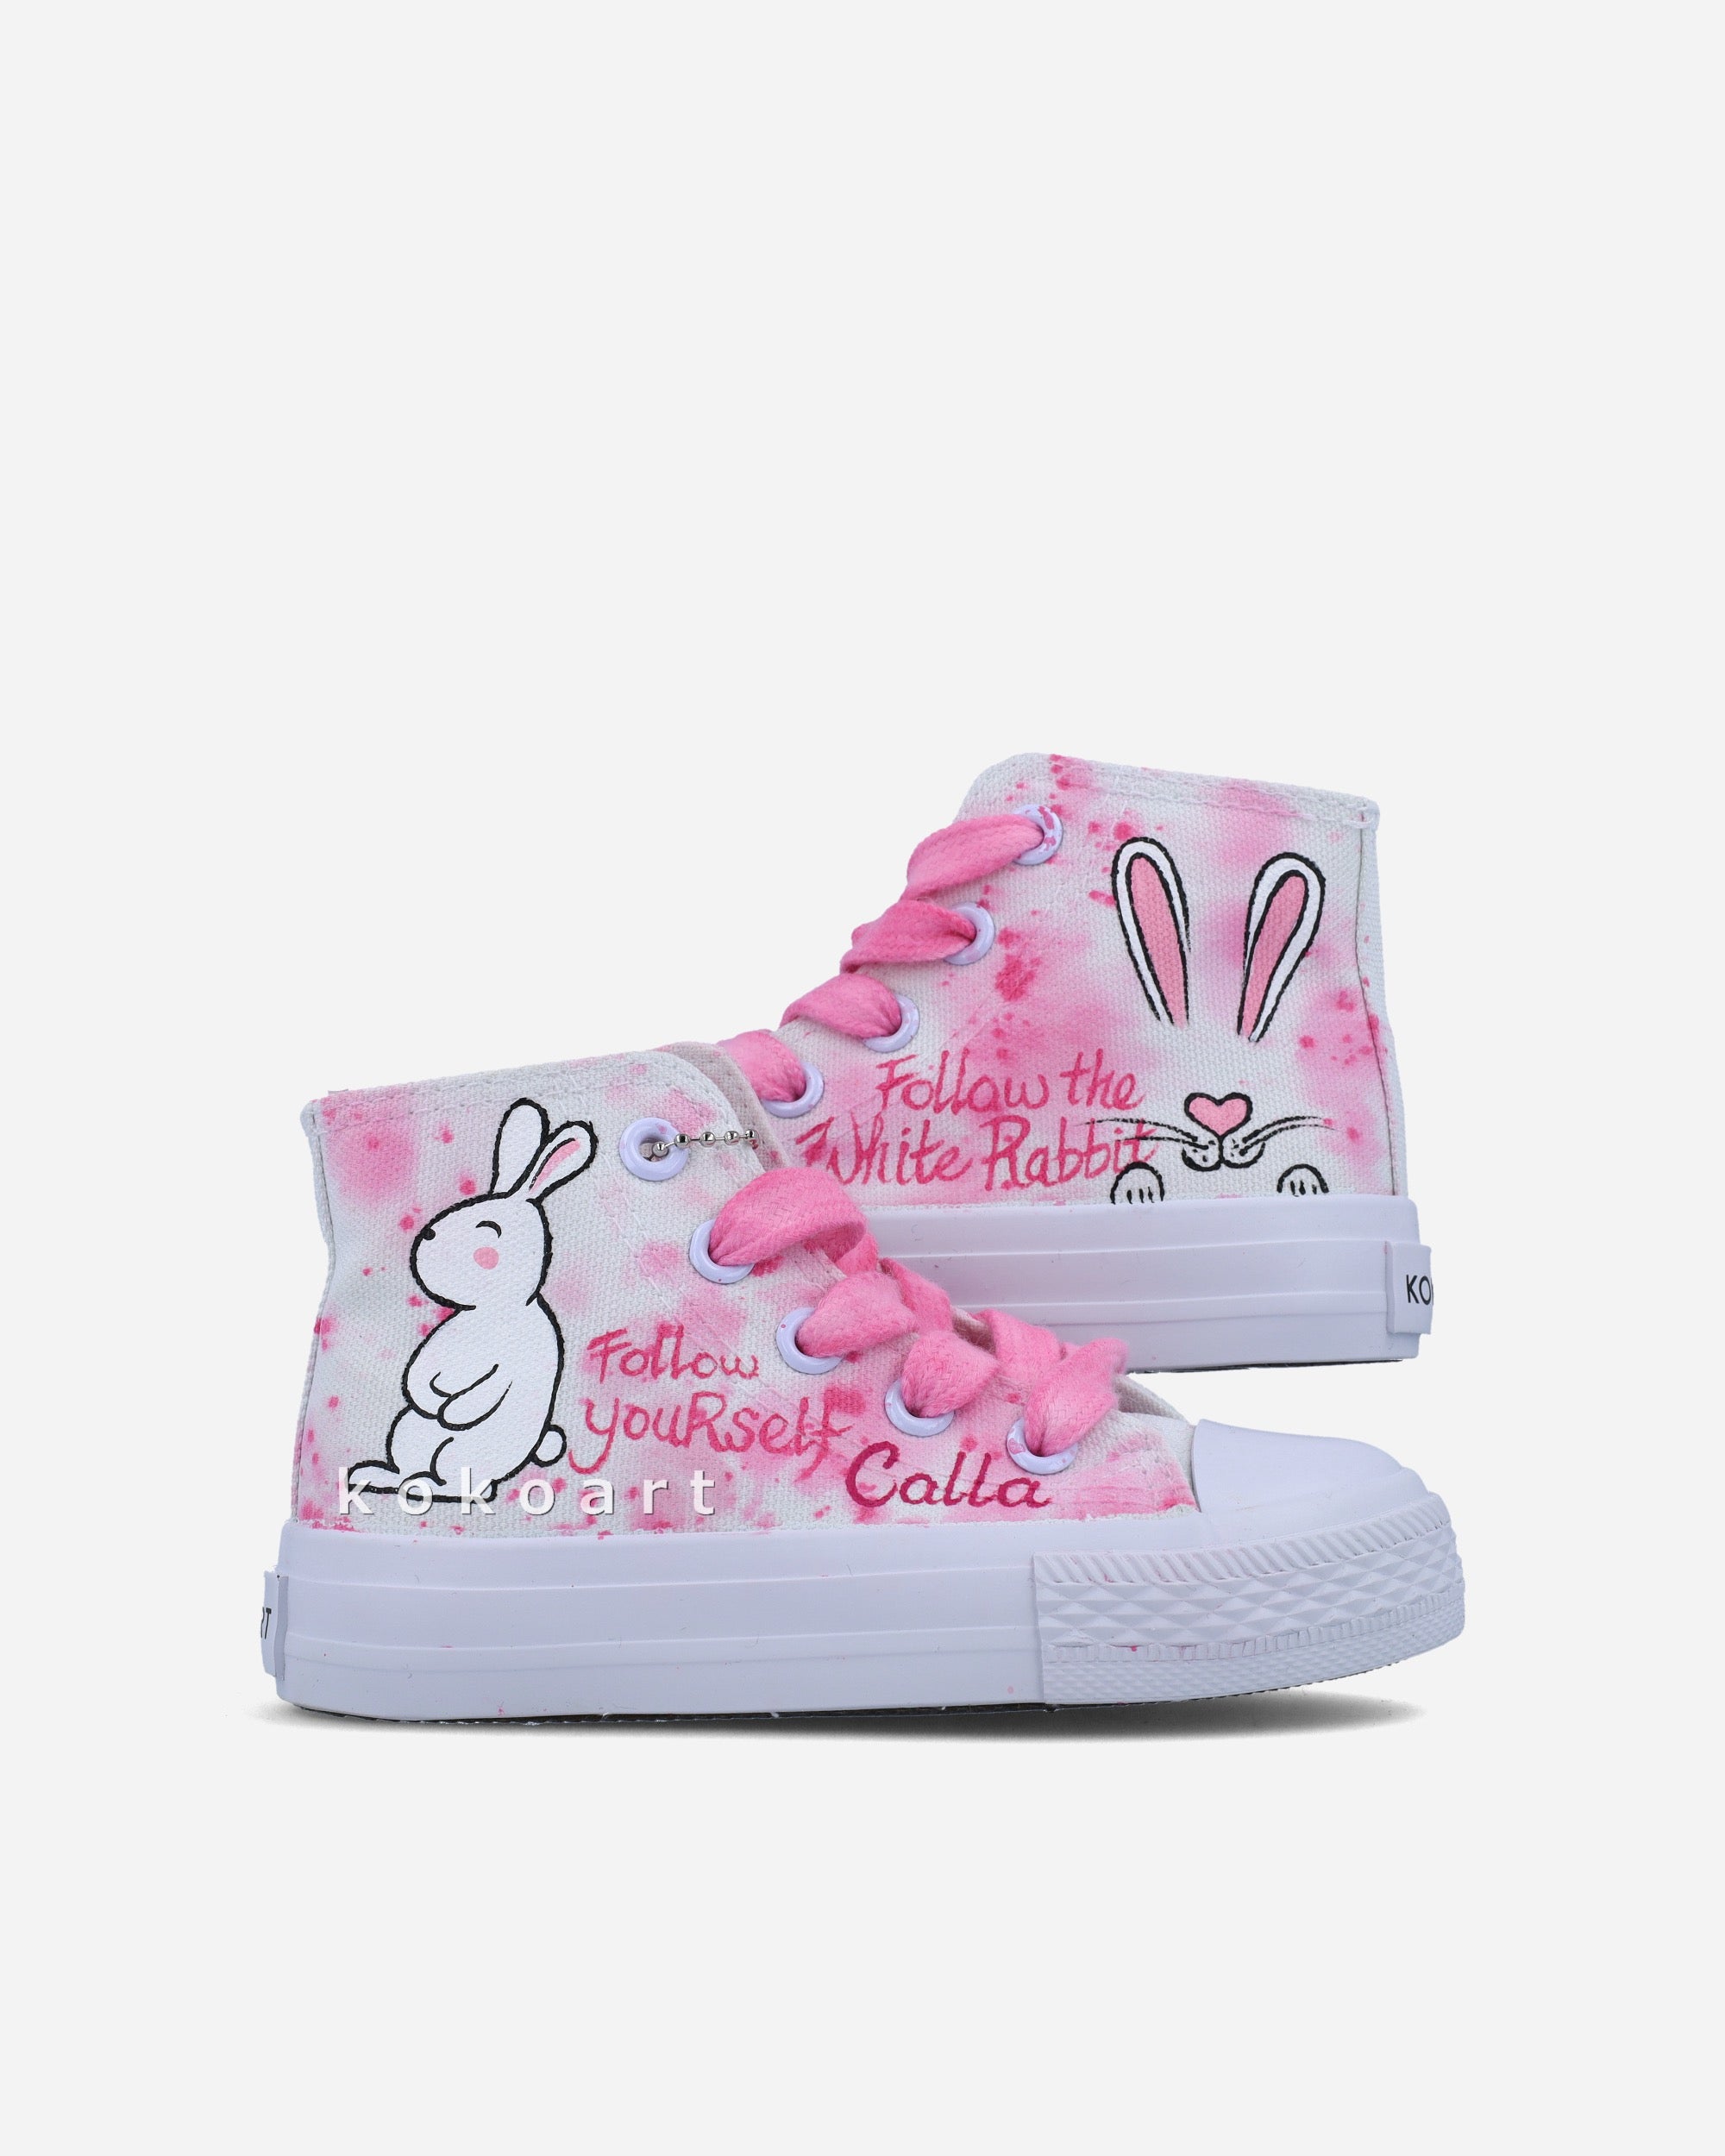 White Rabbit Hand Painted Shoes